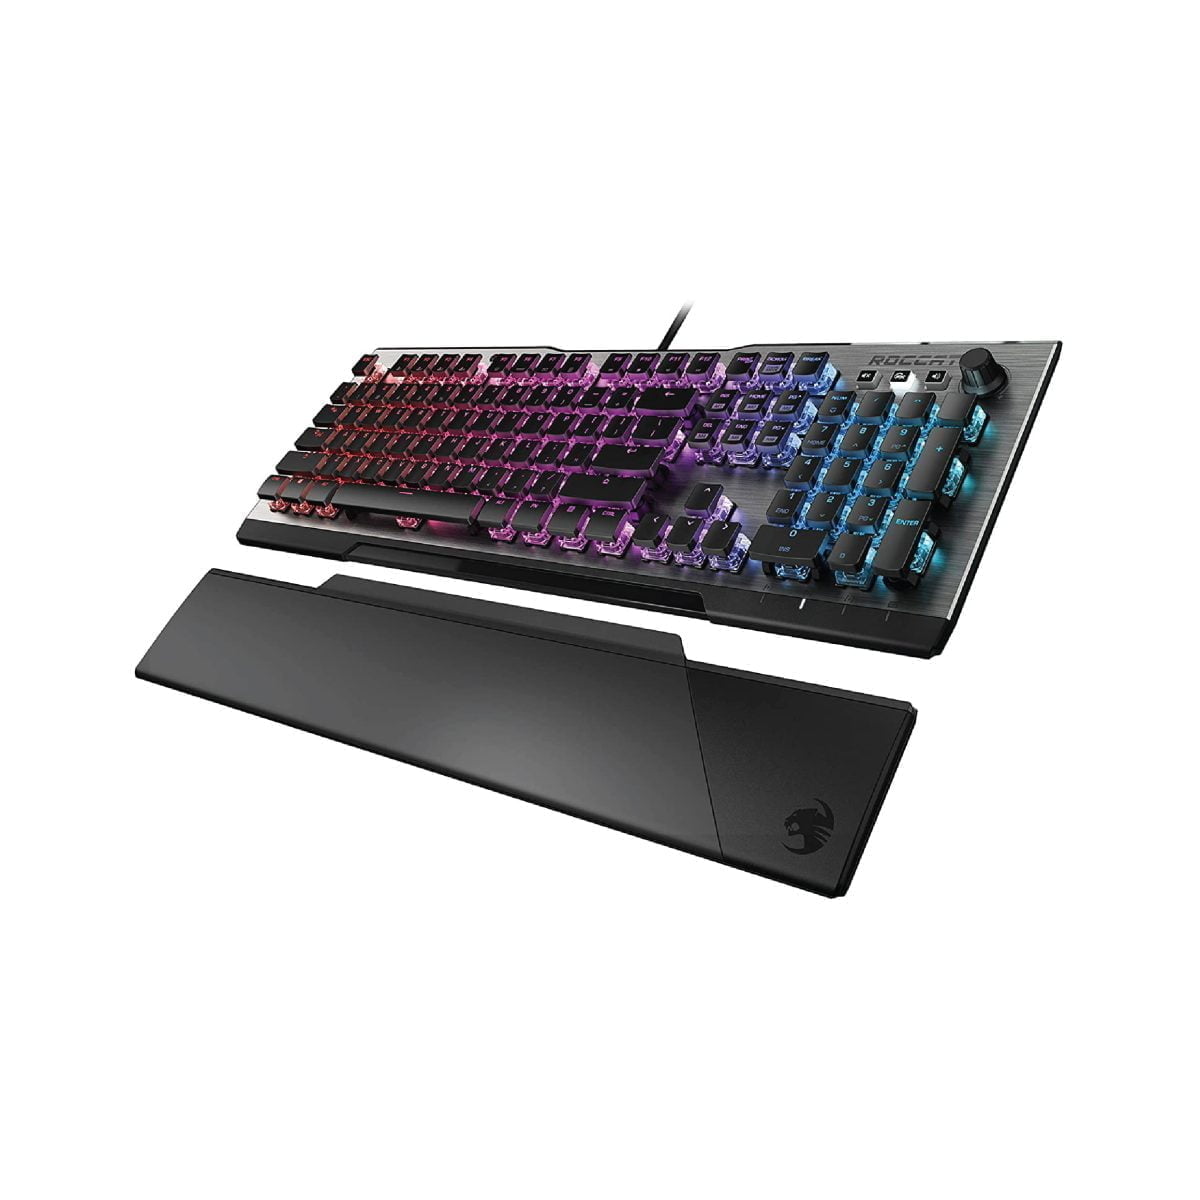 W21 26 Roccat &Amp;Lt;Div Id=&Amp;Quot;Title_Feature_Div&Amp;Quot; Class=&Amp;Quot;Feature&Amp;Quot; Data-Feature-Name=&Amp;Quot;Title&Amp;Quot; Data-Cel-Widget=&Amp;Quot;Title_Feature_Div&Amp;Quot;&Amp;Gt; &Amp;Lt;Div Id=&Amp;Quot;Titlesection&Amp;Quot; Class=&Amp;Quot;A-Section A-Spacing-None&Amp;Quot;&Amp;Gt; &Amp;Lt;P Id=&Amp;Quot;Title&Amp;Quot; Class=&Amp;Quot;A-Size-Large A-Spacing-None&Amp;Quot;&Amp;Gt;&Amp;Lt;Span Id=&Amp;Quot;Producttitle&Amp;Quot; Class=&Amp;Quot;A-Size-Large&Amp;Quot;&Amp;Gt;Roccat Vulcan 120 Aimo, Tactile, Silent Switch, Us Layout, Eu Packaging&Amp;Lt;/Span&Amp;Gt;&Amp;Lt;/P&Amp;Gt; &Amp;Lt;Div Id=&Amp;Quot;Main_Textcontent&Amp;Quot;&Amp;Gt; &Amp;Lt;Div Class=&Amp;Quot;Contentrow&Amp;Quot;&Amp;Gt; &Amp;Lt;Div Class=&Amp;Quot;Copytext&Amp;Quot;&Amp;Gt;The Vulcan Is A Precision Gaming Tool That Lets You Sense Its Performance From The First Glance And The First Key Stroke. Developed Following The Renowned Principles Of German Design And Engineering, It Is The Best Keyboard Roccat Has Ever Built.&Amp;Lt;/Div&Amp;Gt; &Amp;Lt;/Div&Amp;Gt; &Amp;Lt;/Div&Amp;Gt; &Amp;Lt;Div Id=&Amp;Quot;Thumbnail_Gallery&Amp;Quot;&Amp;Gt; &Amp;Lt;Div Class=&Amp;Quot;Fullwidthrow&Amp;Quot;&Amp;Gt; &Amp;Lt;Div Class=&Amp;Quot;Gallery&Amp;Quot;&Amp;Gt; &Amp;Lt;Div Class=&Amp;Quot;Gallerydisplay&Amp;Quot;&Amp;Gt; &Amp;Nbsp; &Amp;Lt;/Div&Amp;Gt; &Amp;Lt;/Div&Amp;Gt; &Amp;Lt;/Div&Amp;Gt; &Amp;Lt;/Div&Amp;Gt; &Amp;Lt;/Div&Amp;Gt; &Amp;Lt;/Div&Amp;Gt; Roccat Roccat Vulcan 120 Aimo Mechanical Gaming Keyboard